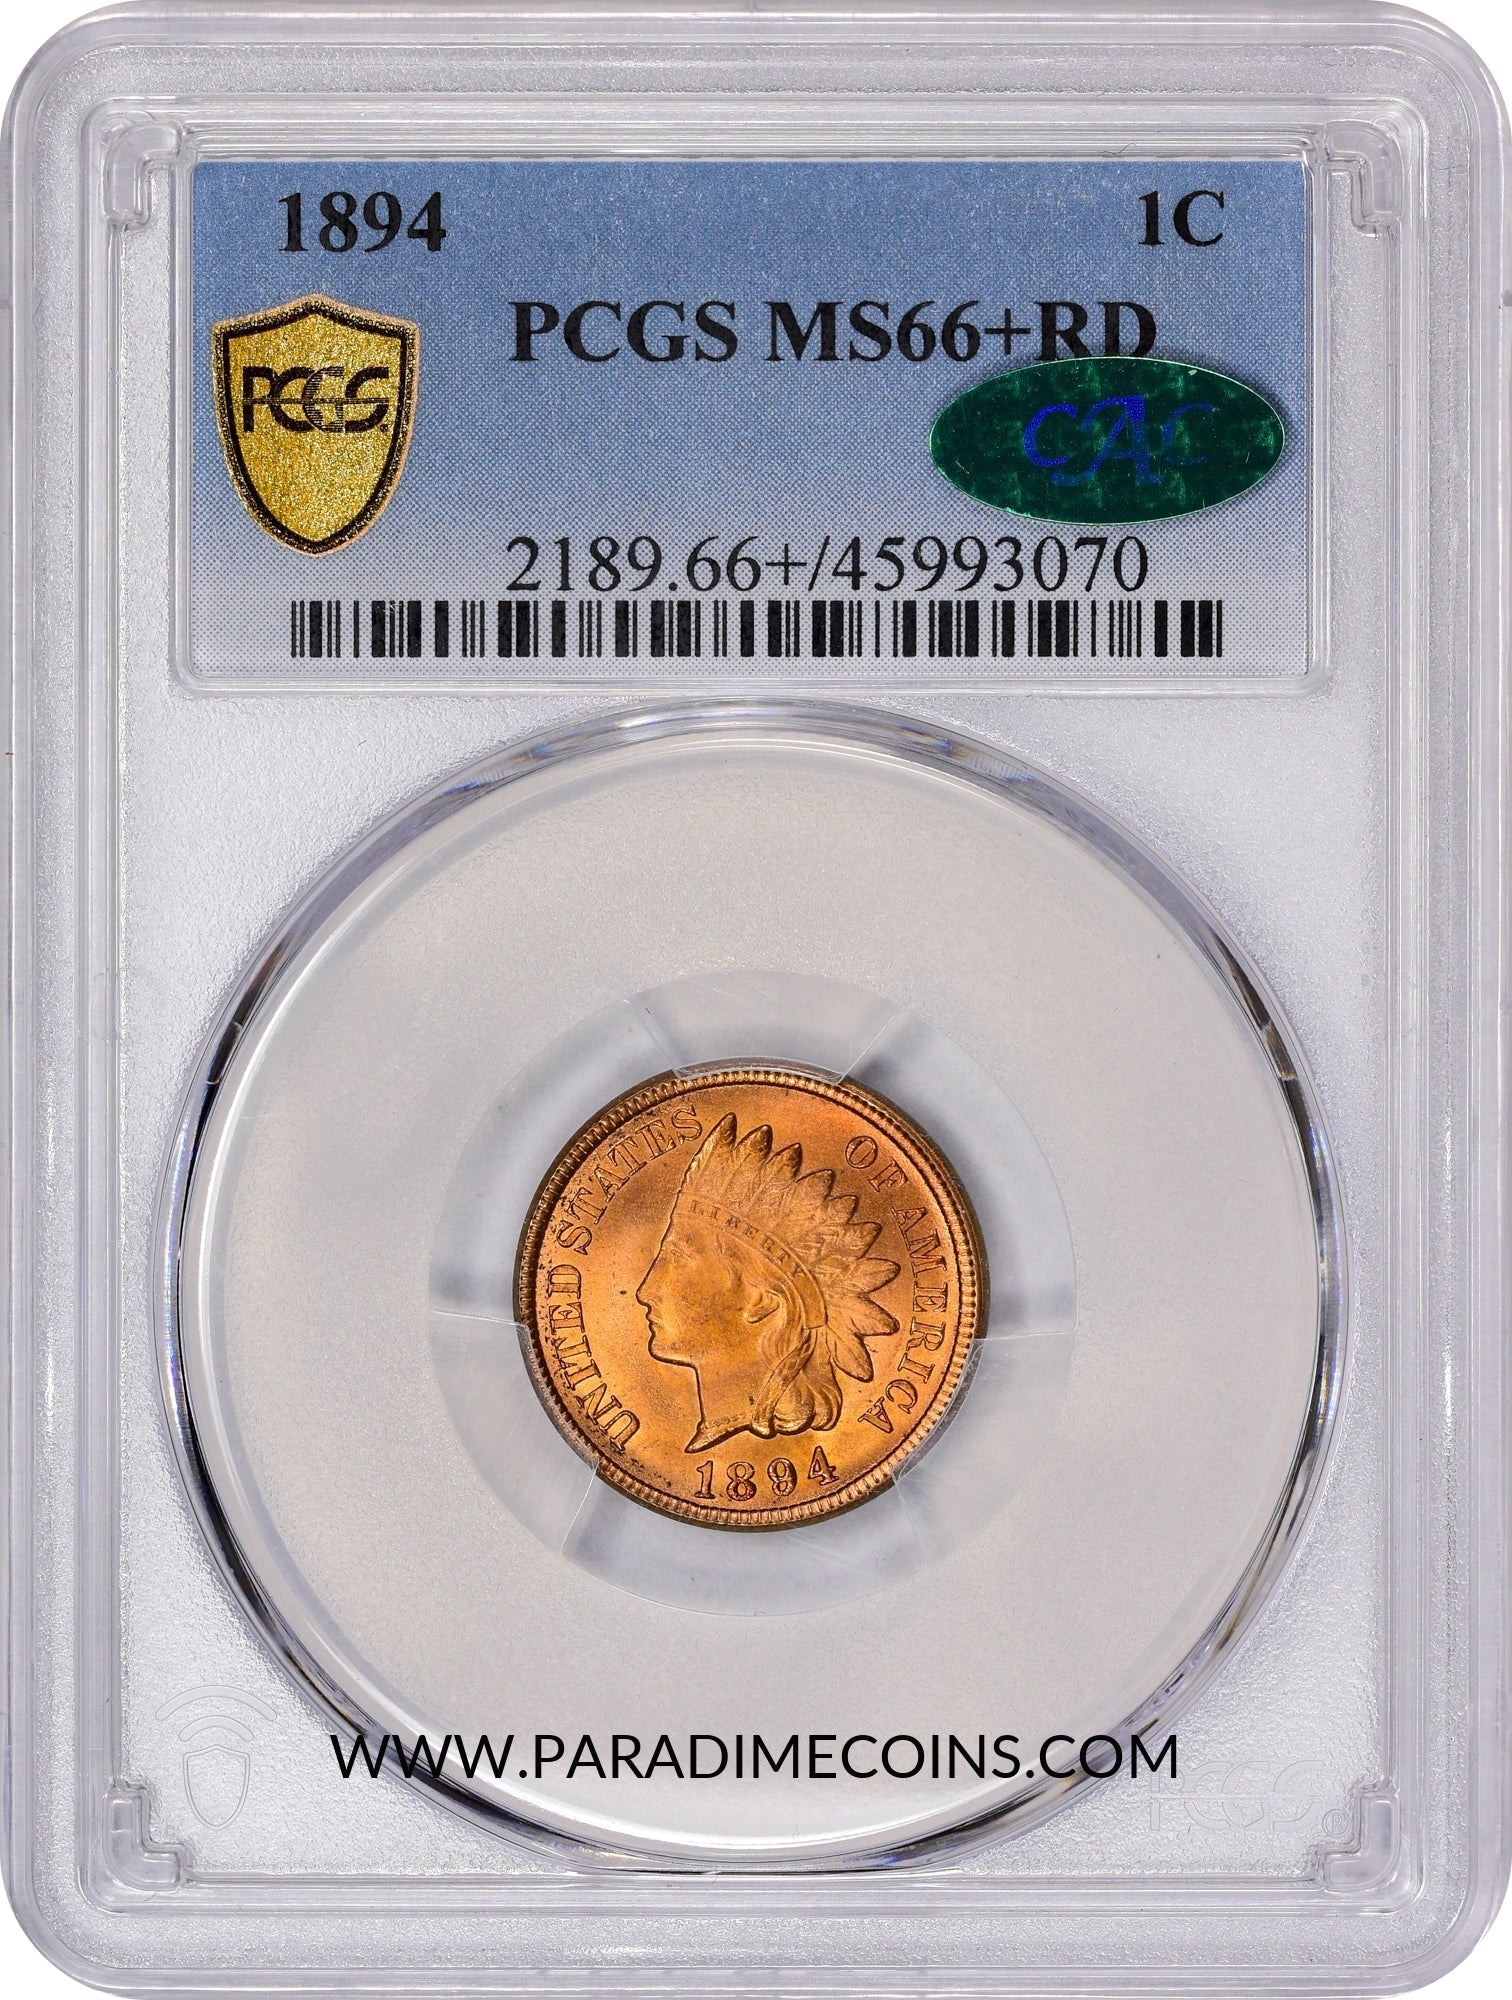 1894 1C MS66+ RD PCGS CAC - Paradime Coins | PCGS NGC CACG CAC Rare US Numismatic Coins For Sale